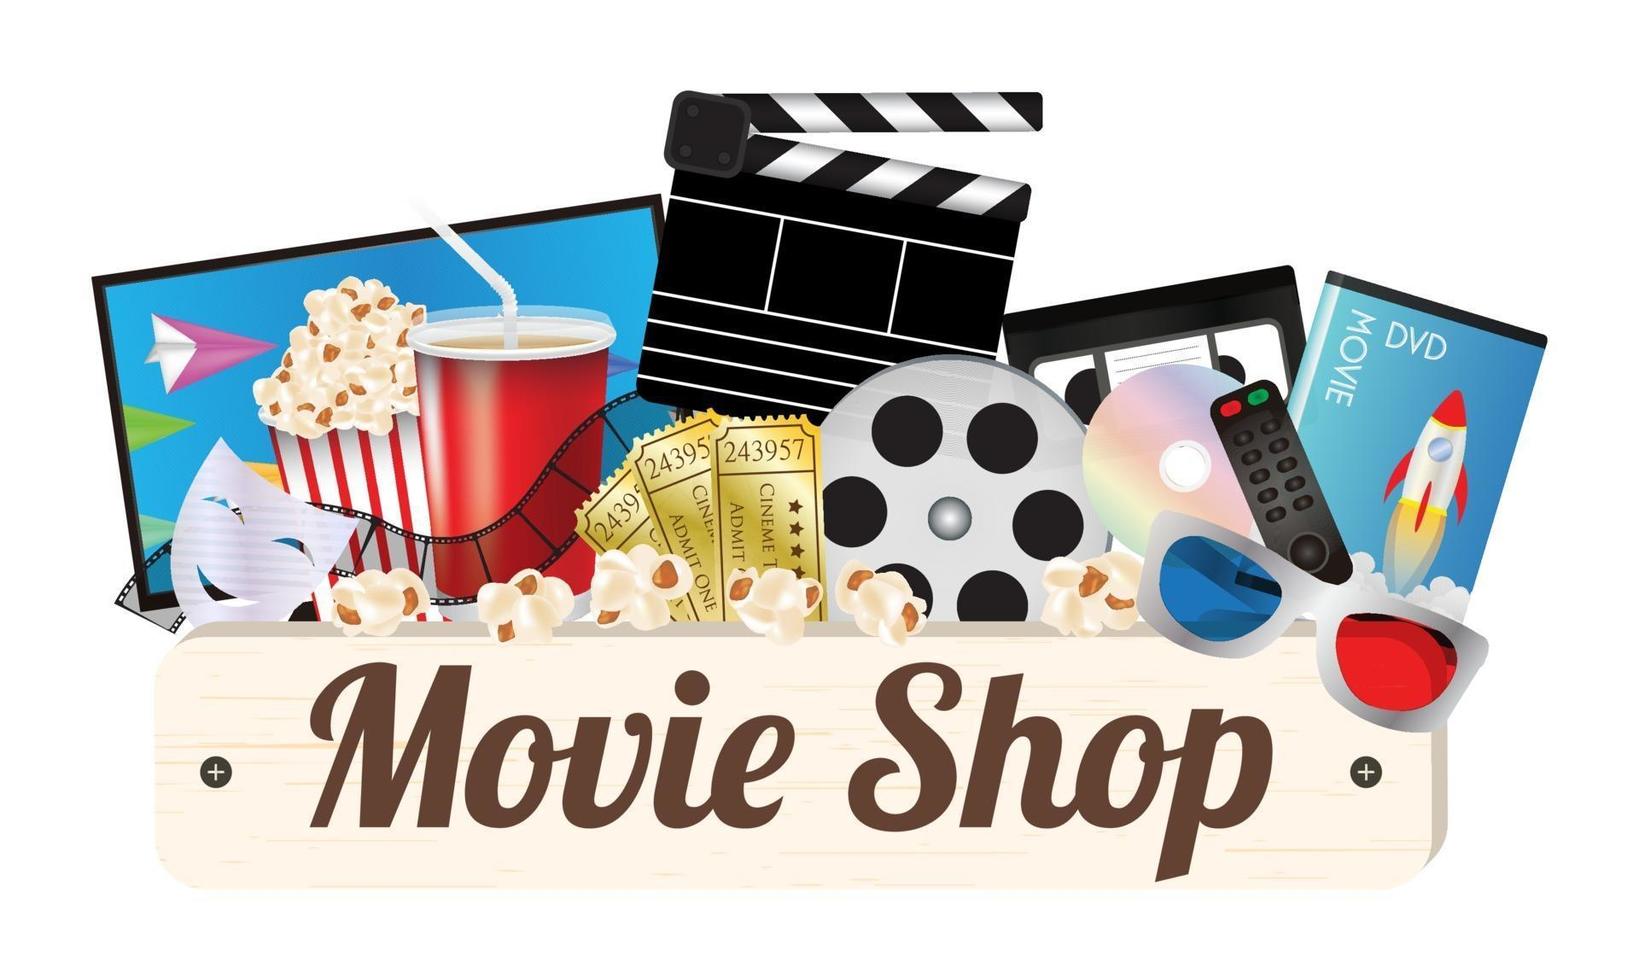 Movie shop wood board with pop corn, film, cd disc, dvd, movie box, smart television, remote, ticket, emotion mask and 3d glasses vector